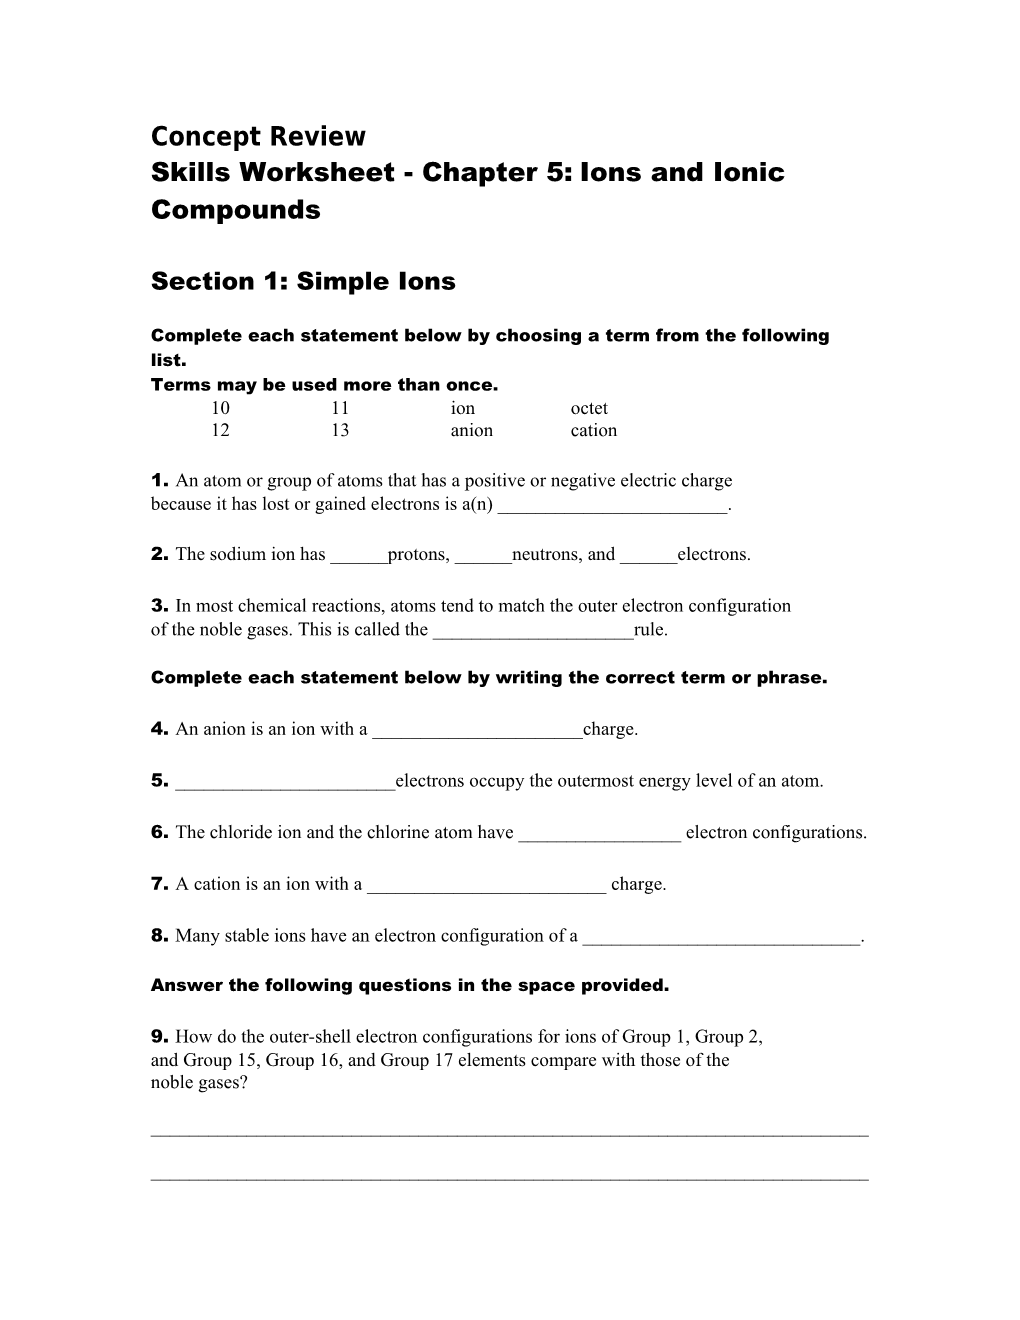 Skills Worksheet - Chapter 5: Ions and Ionic Compounds